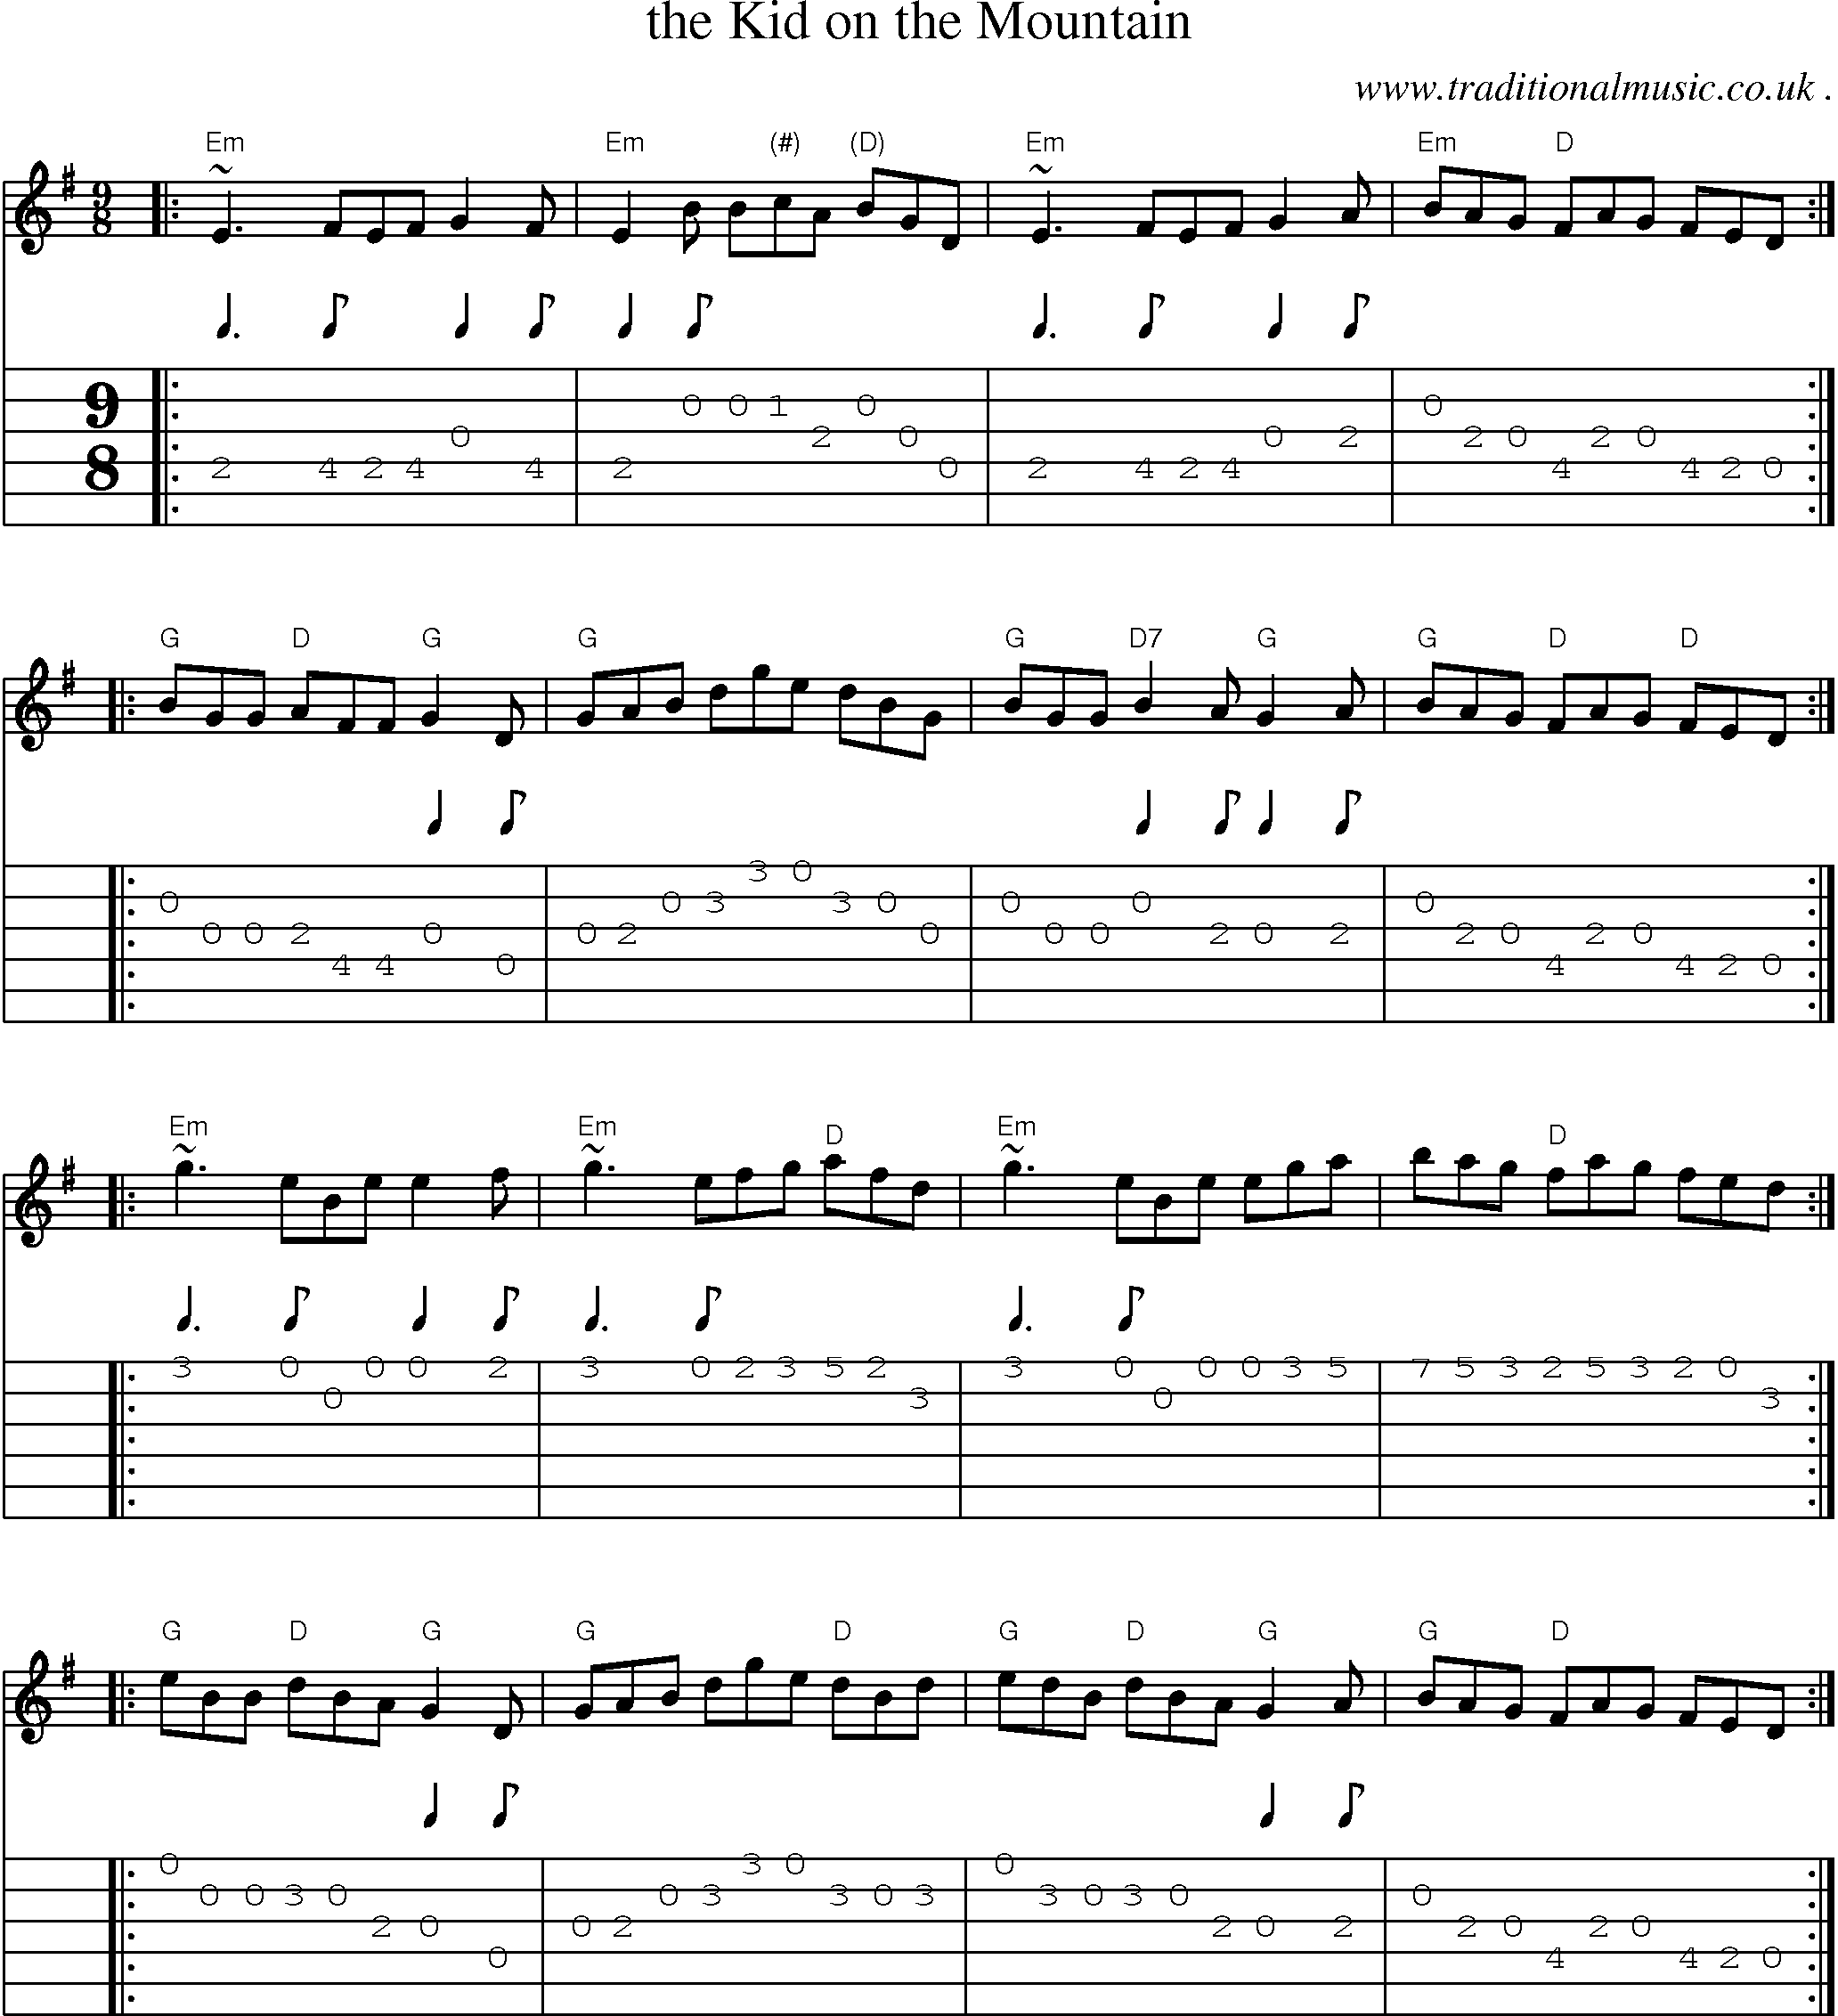 Sheet-music  score, Chords and Guitar Tabs for The Kid On The Mountain